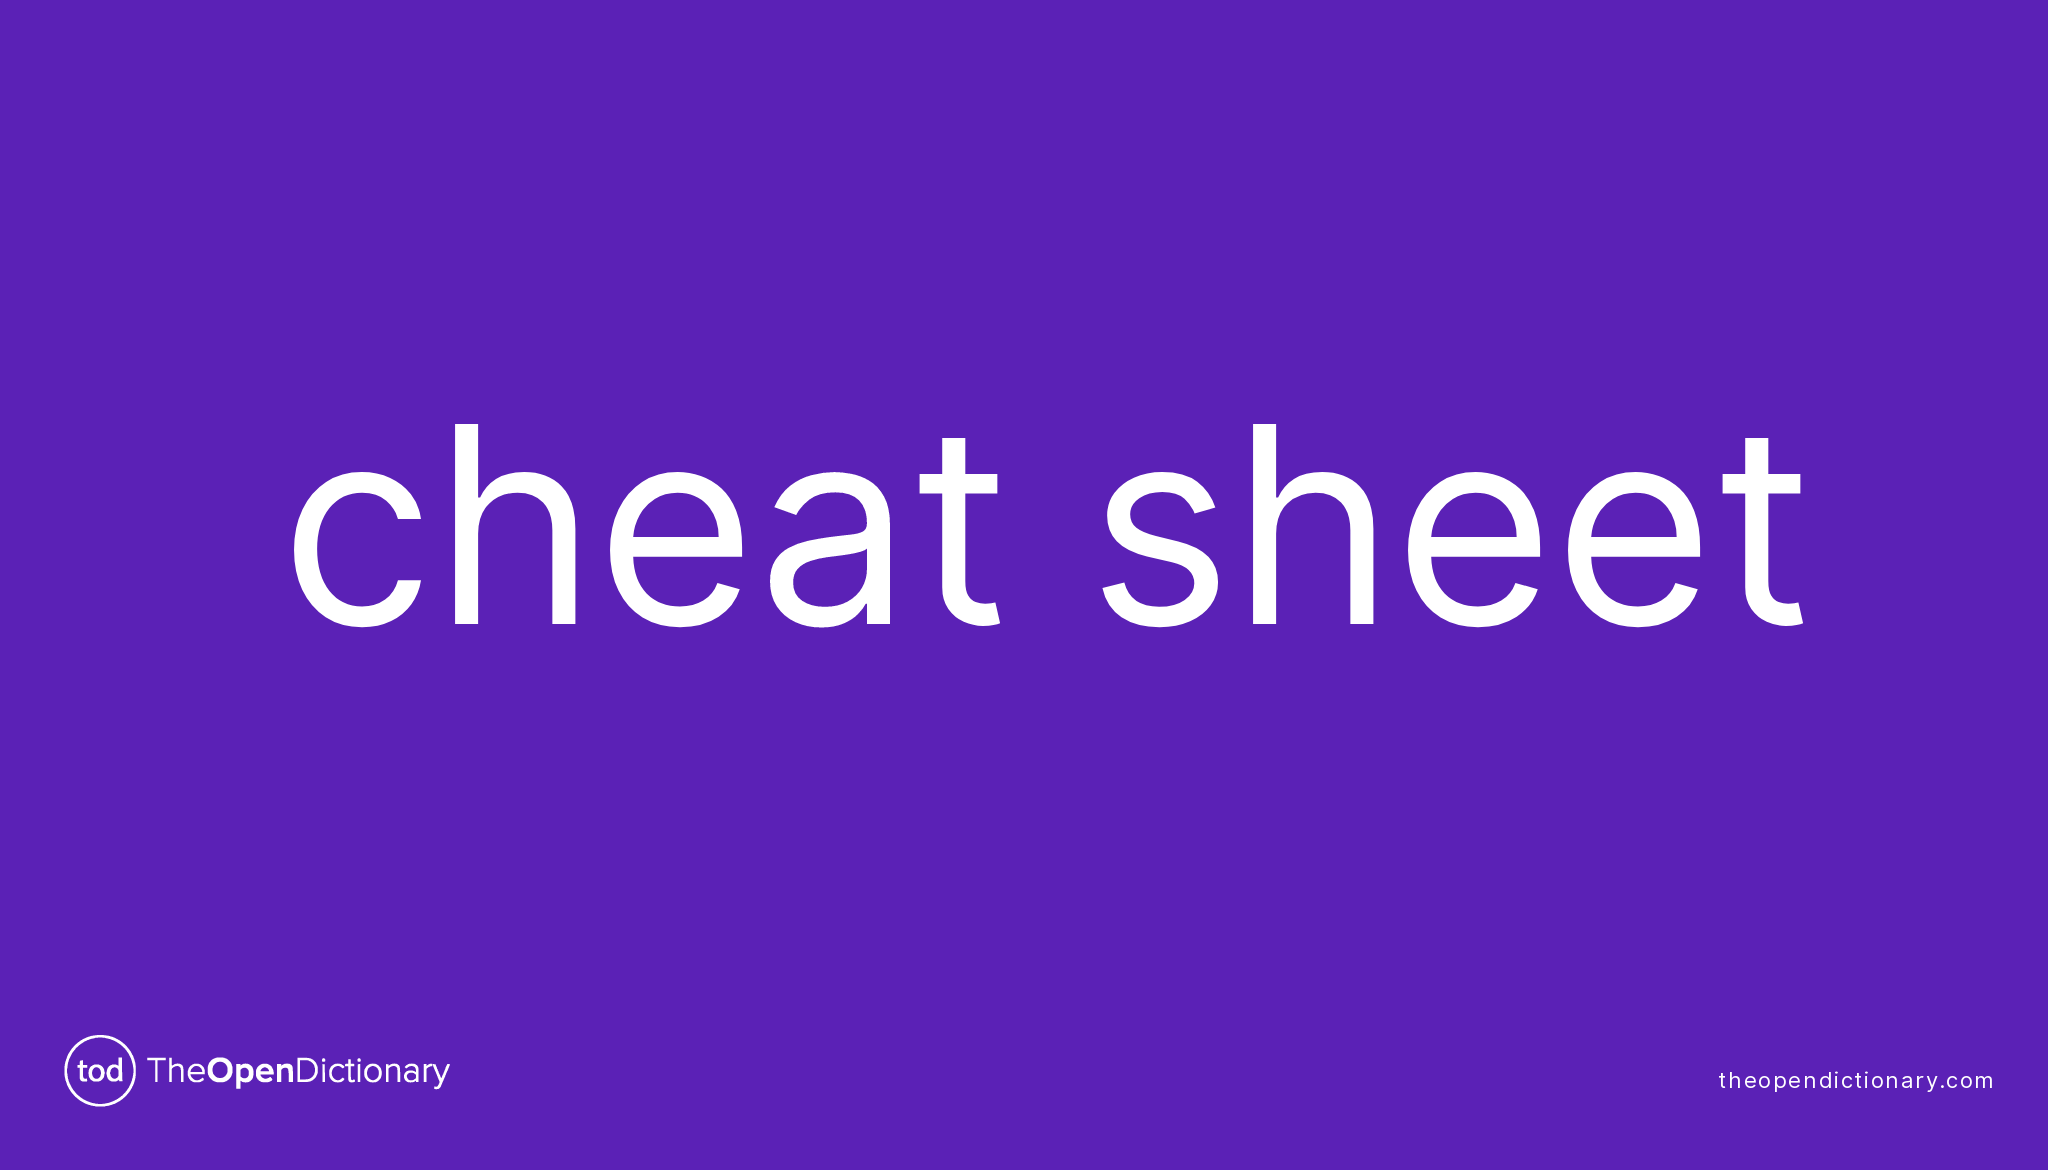 cheat-sheet-what-is-the-definition-and-meaning-of-idiom-cheat-sheet